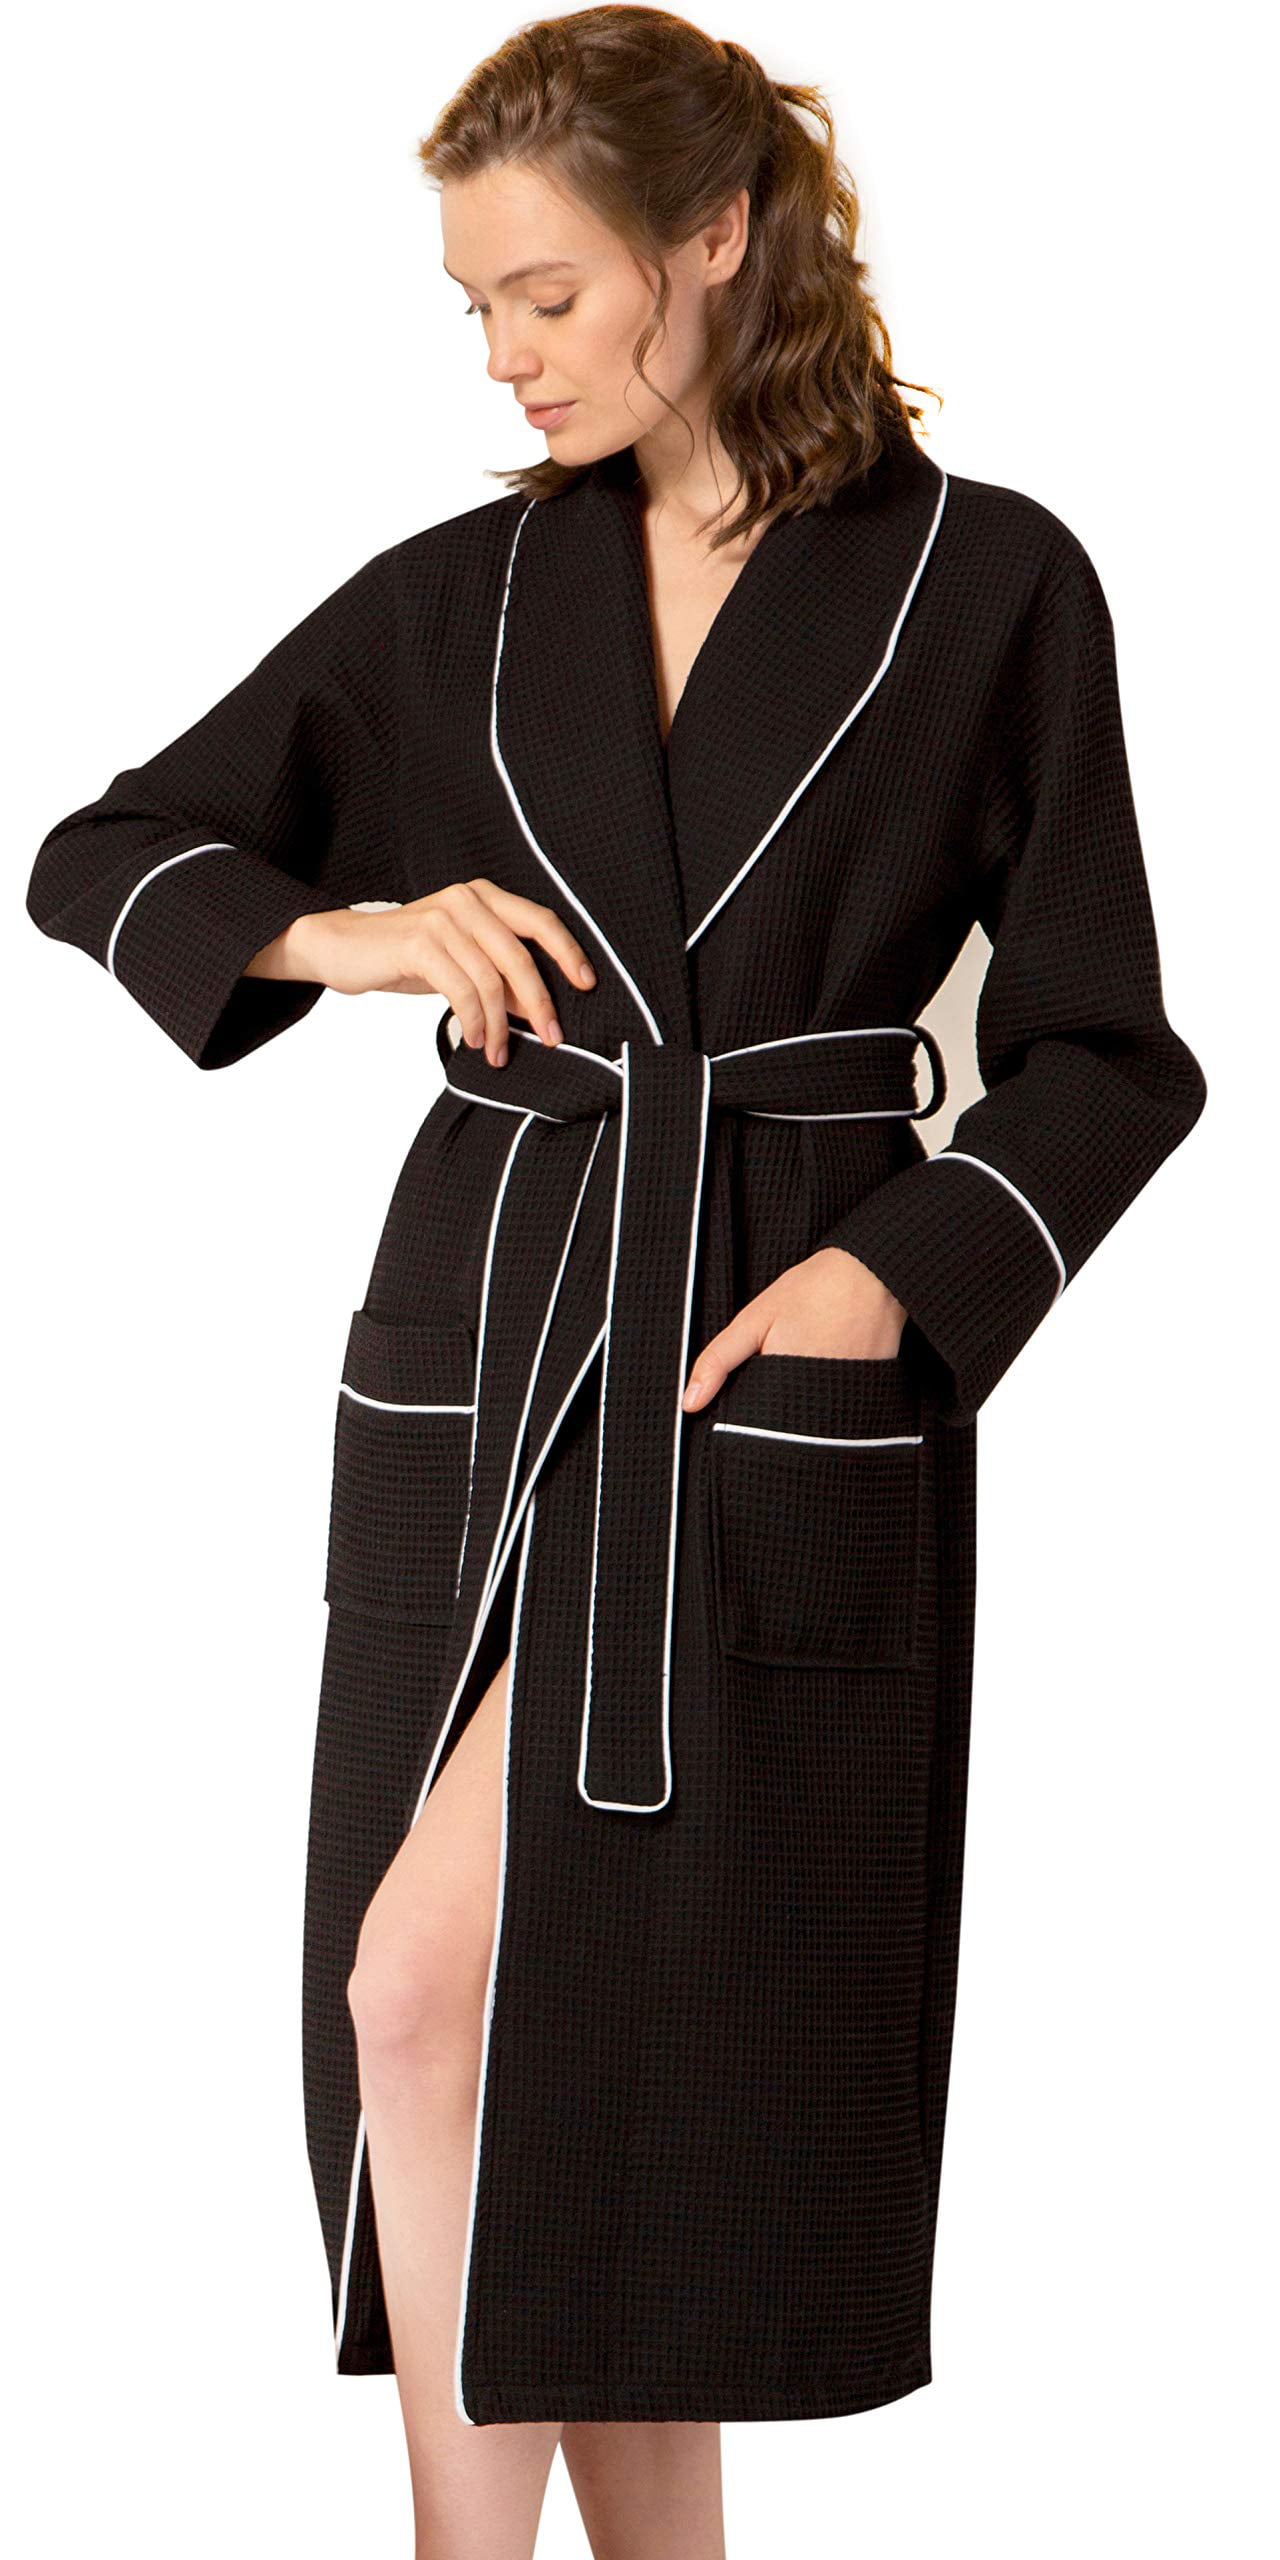 Tralilbee Women’s Luxury Waffle Shawl Collar Robe with Piping ...